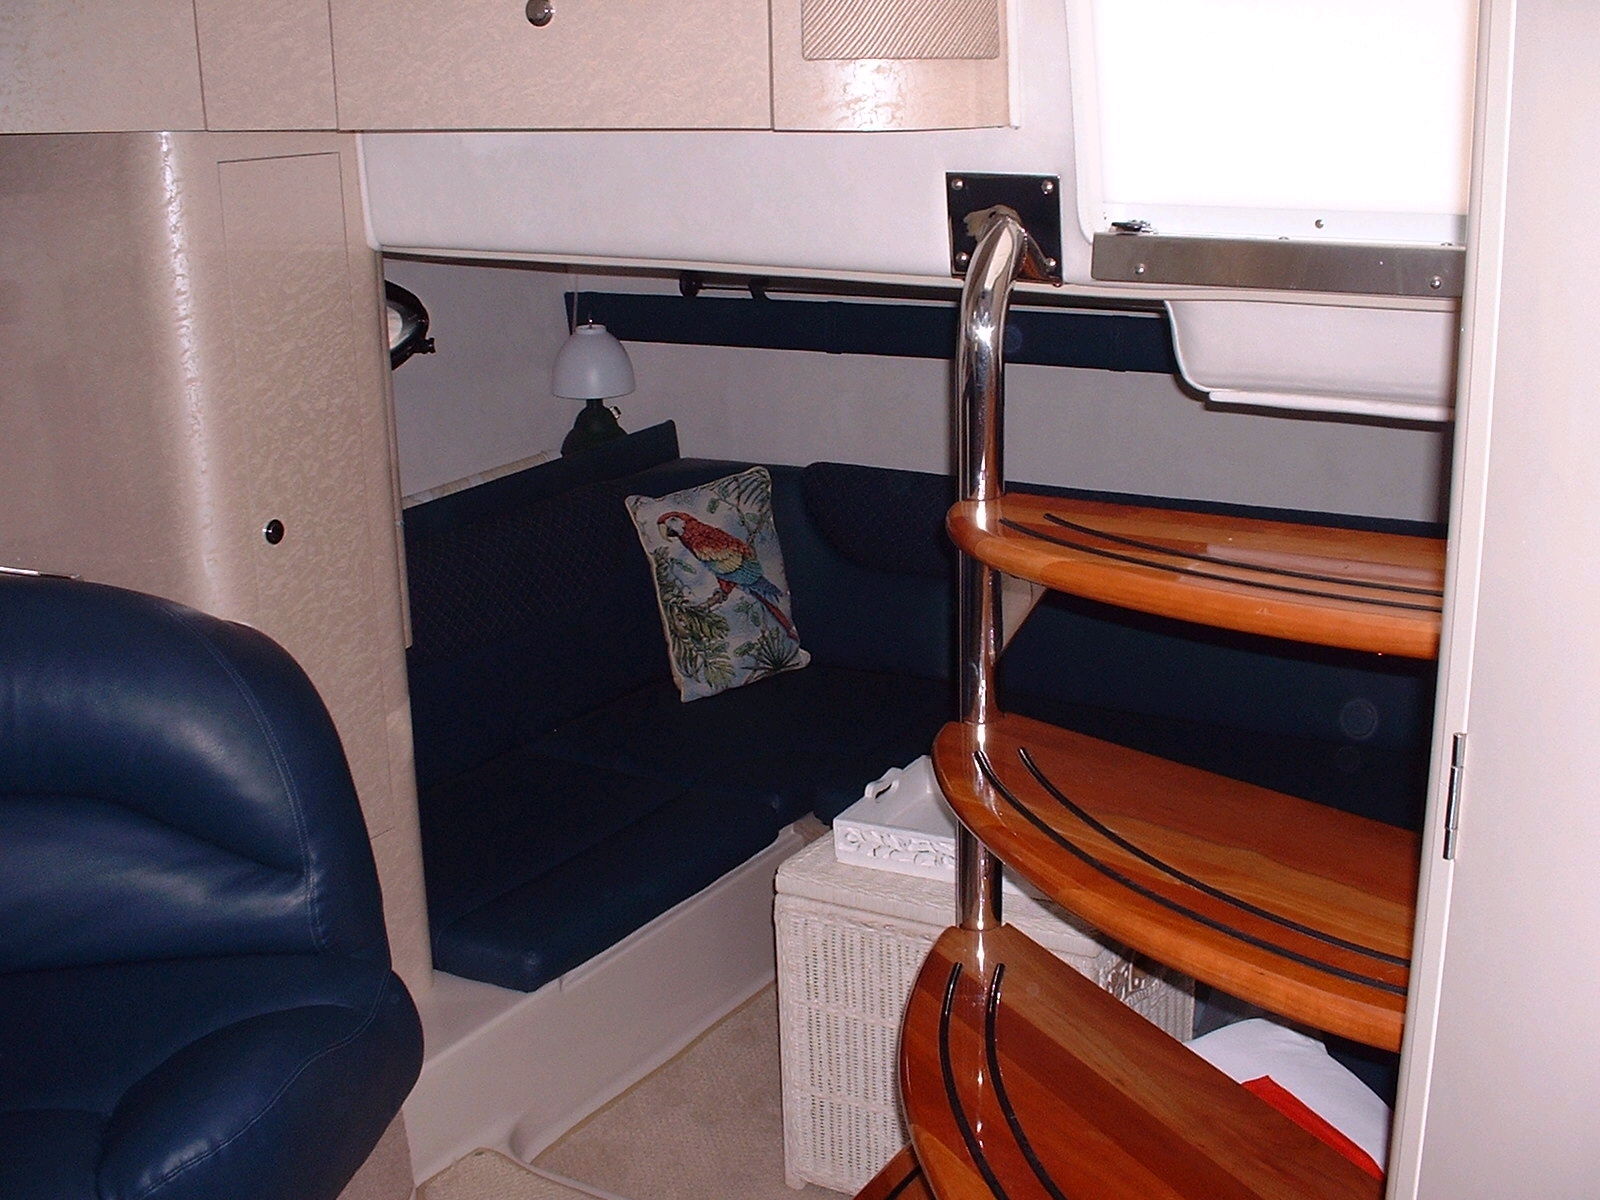 Doral SE 36 Foot Yacht Galley